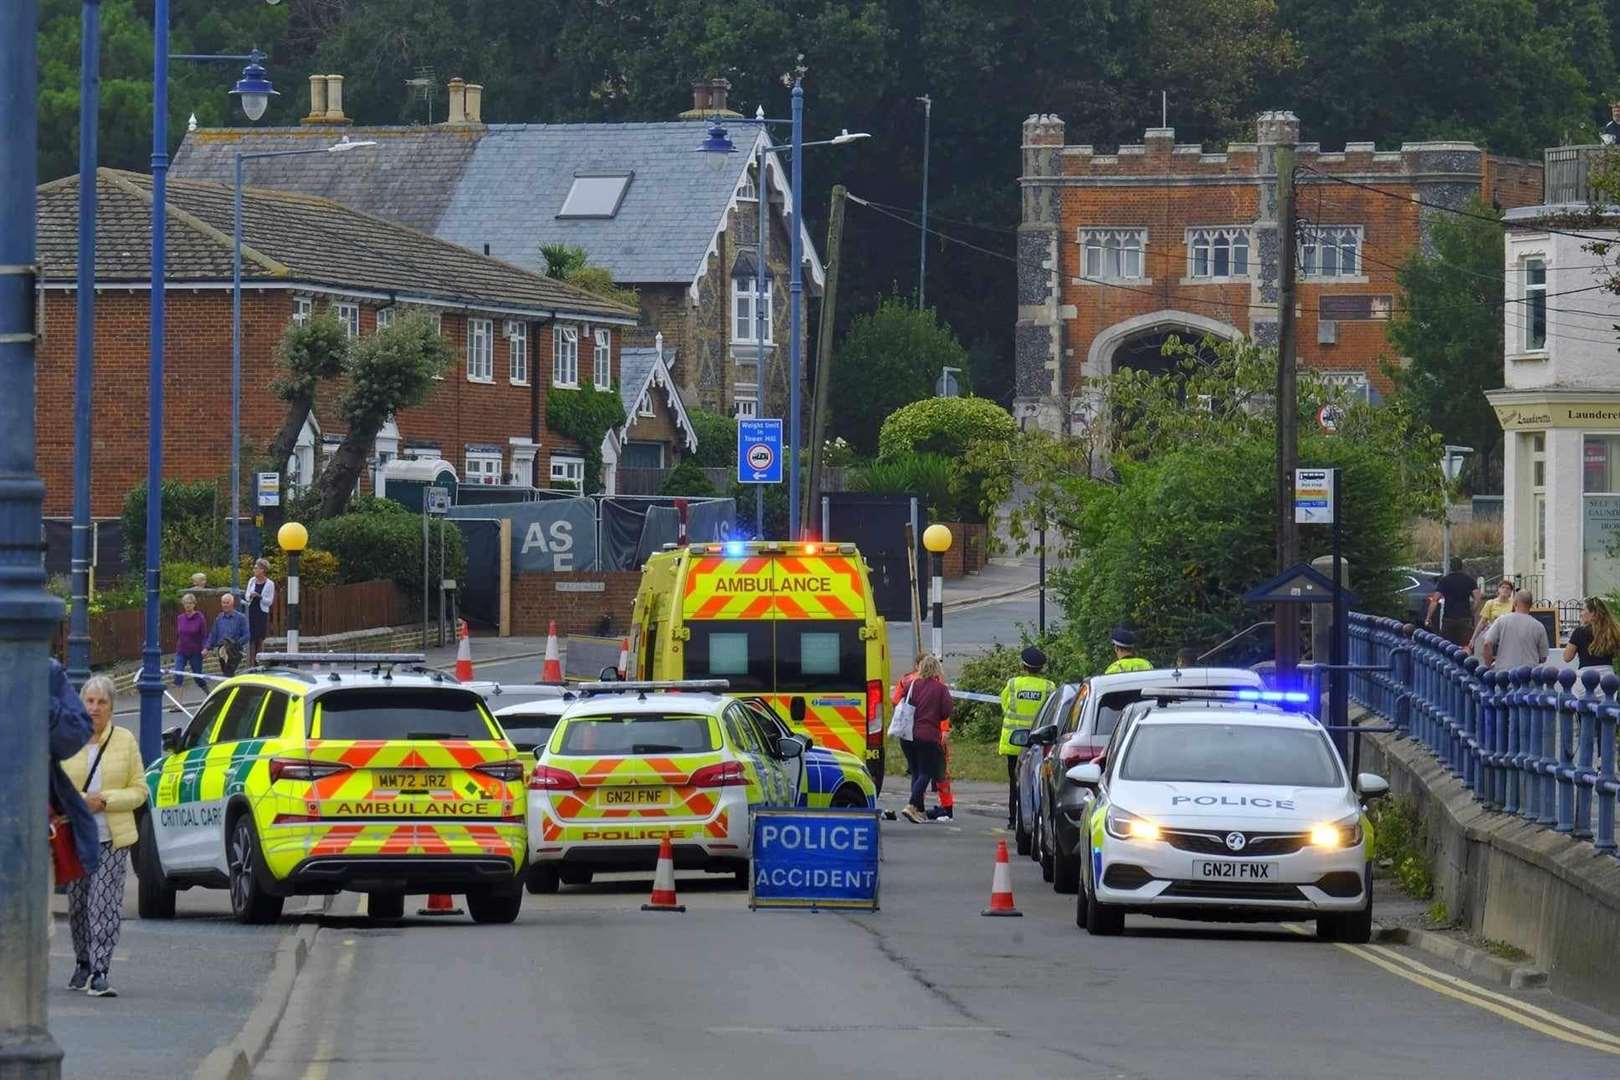 Emergency services were called to Tower Parade in Whitstable after reports of an accident. Picture: Tom Banbury